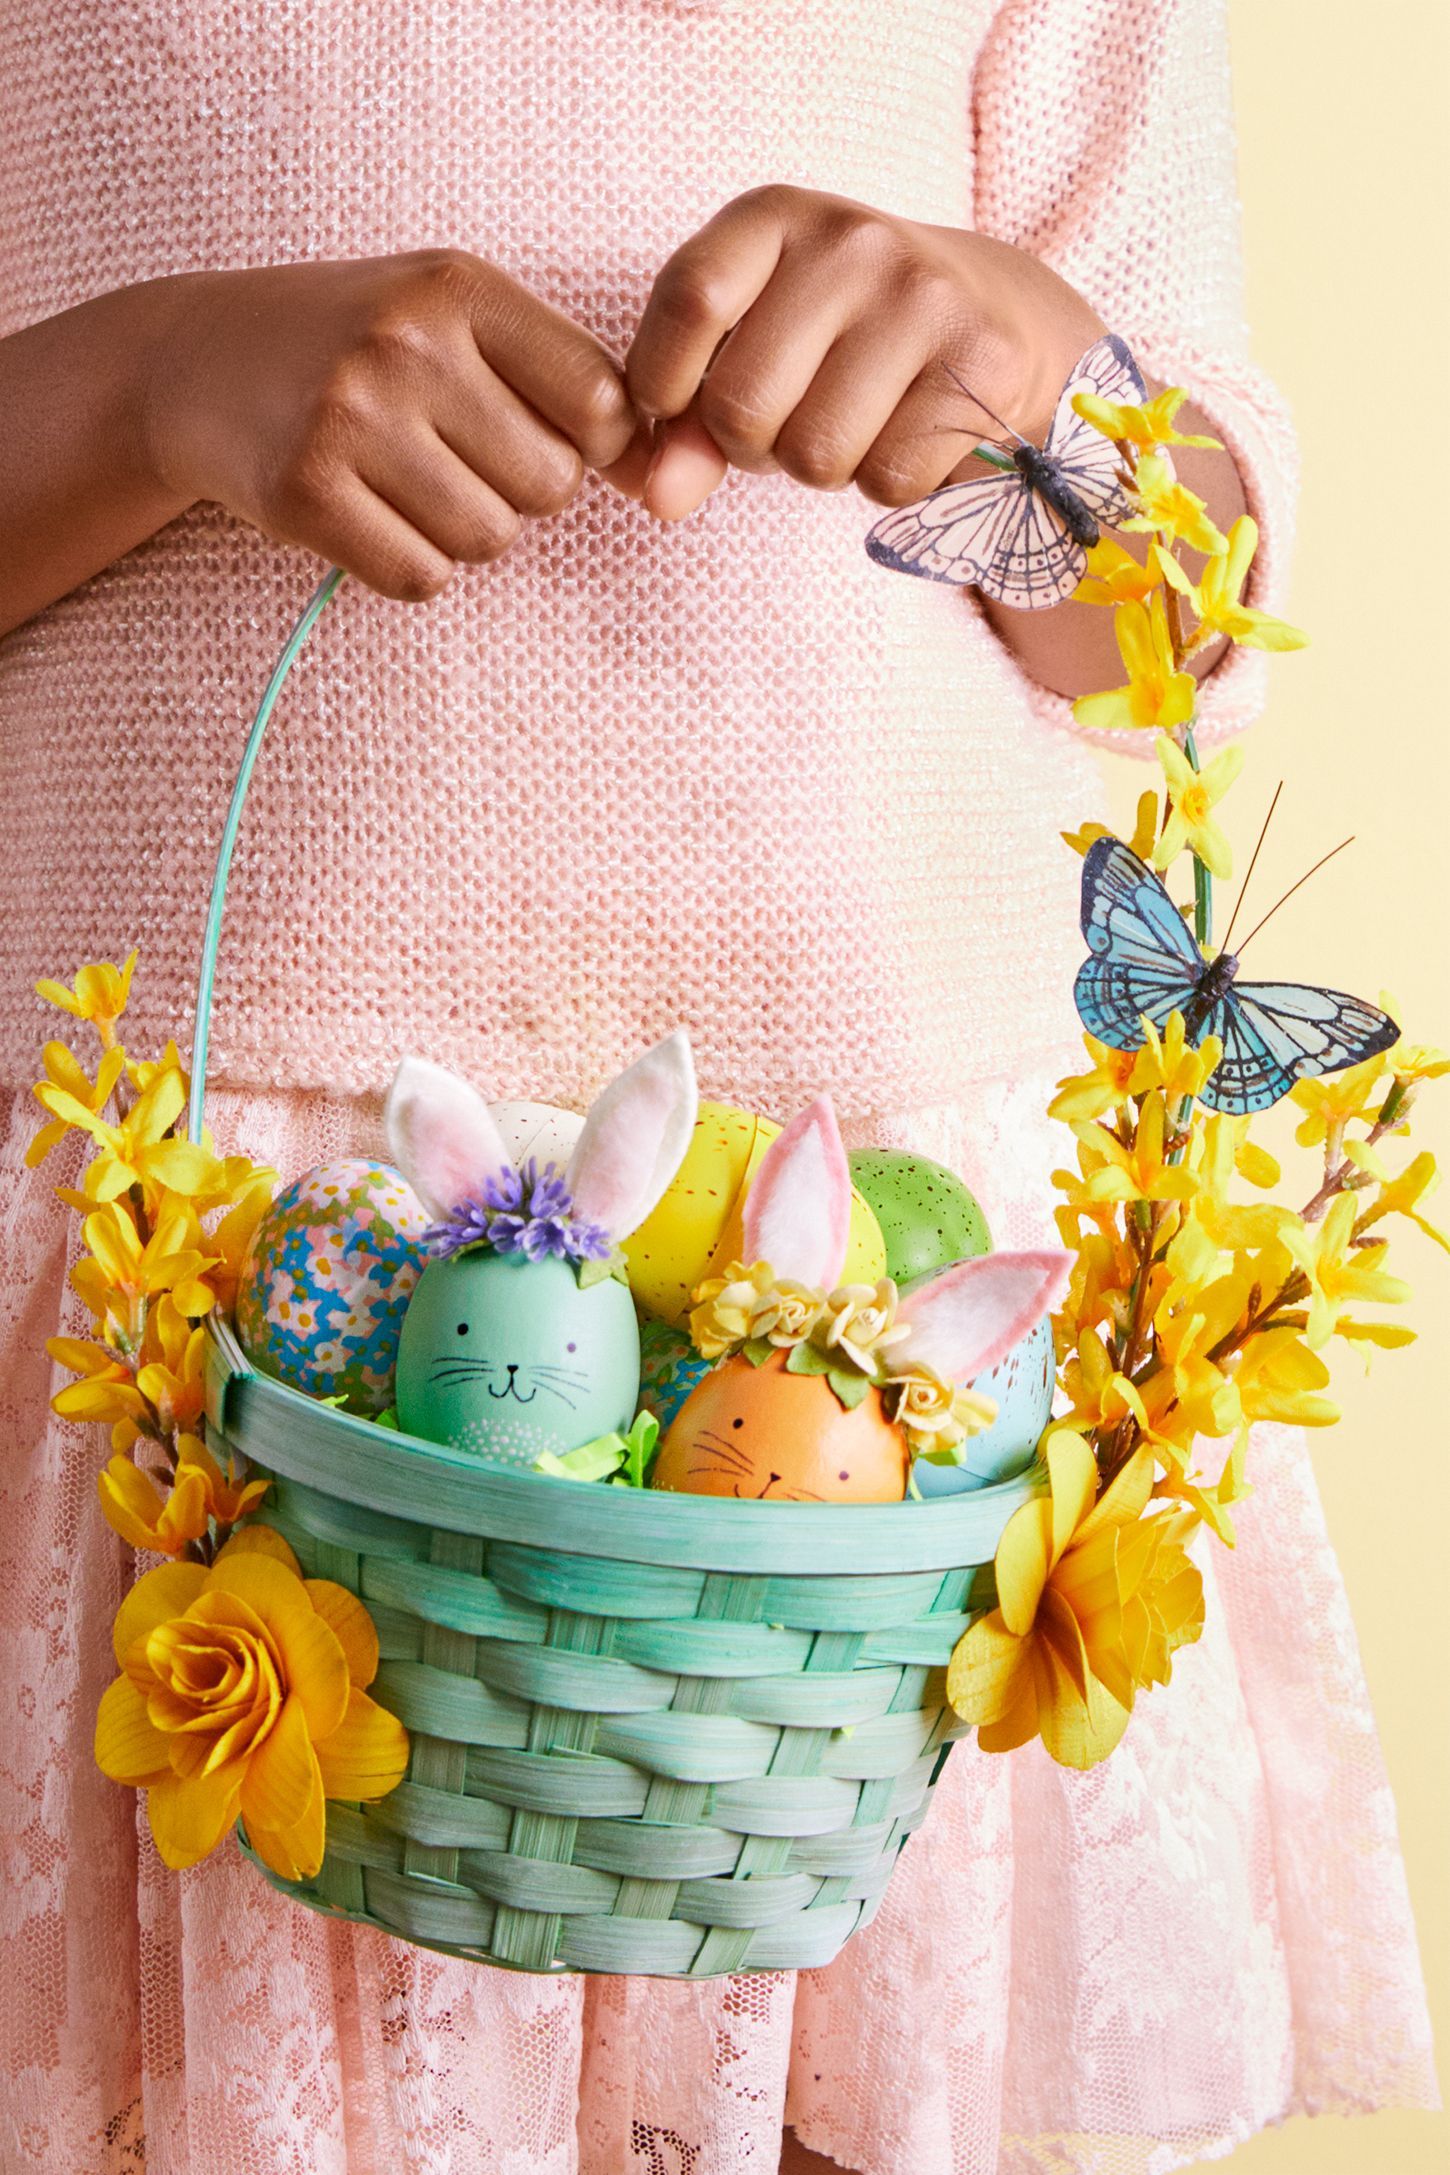 40 Easy Easter Crafts Diy Easter Decorations,Raised Ranch Exterior Remodel Ideas